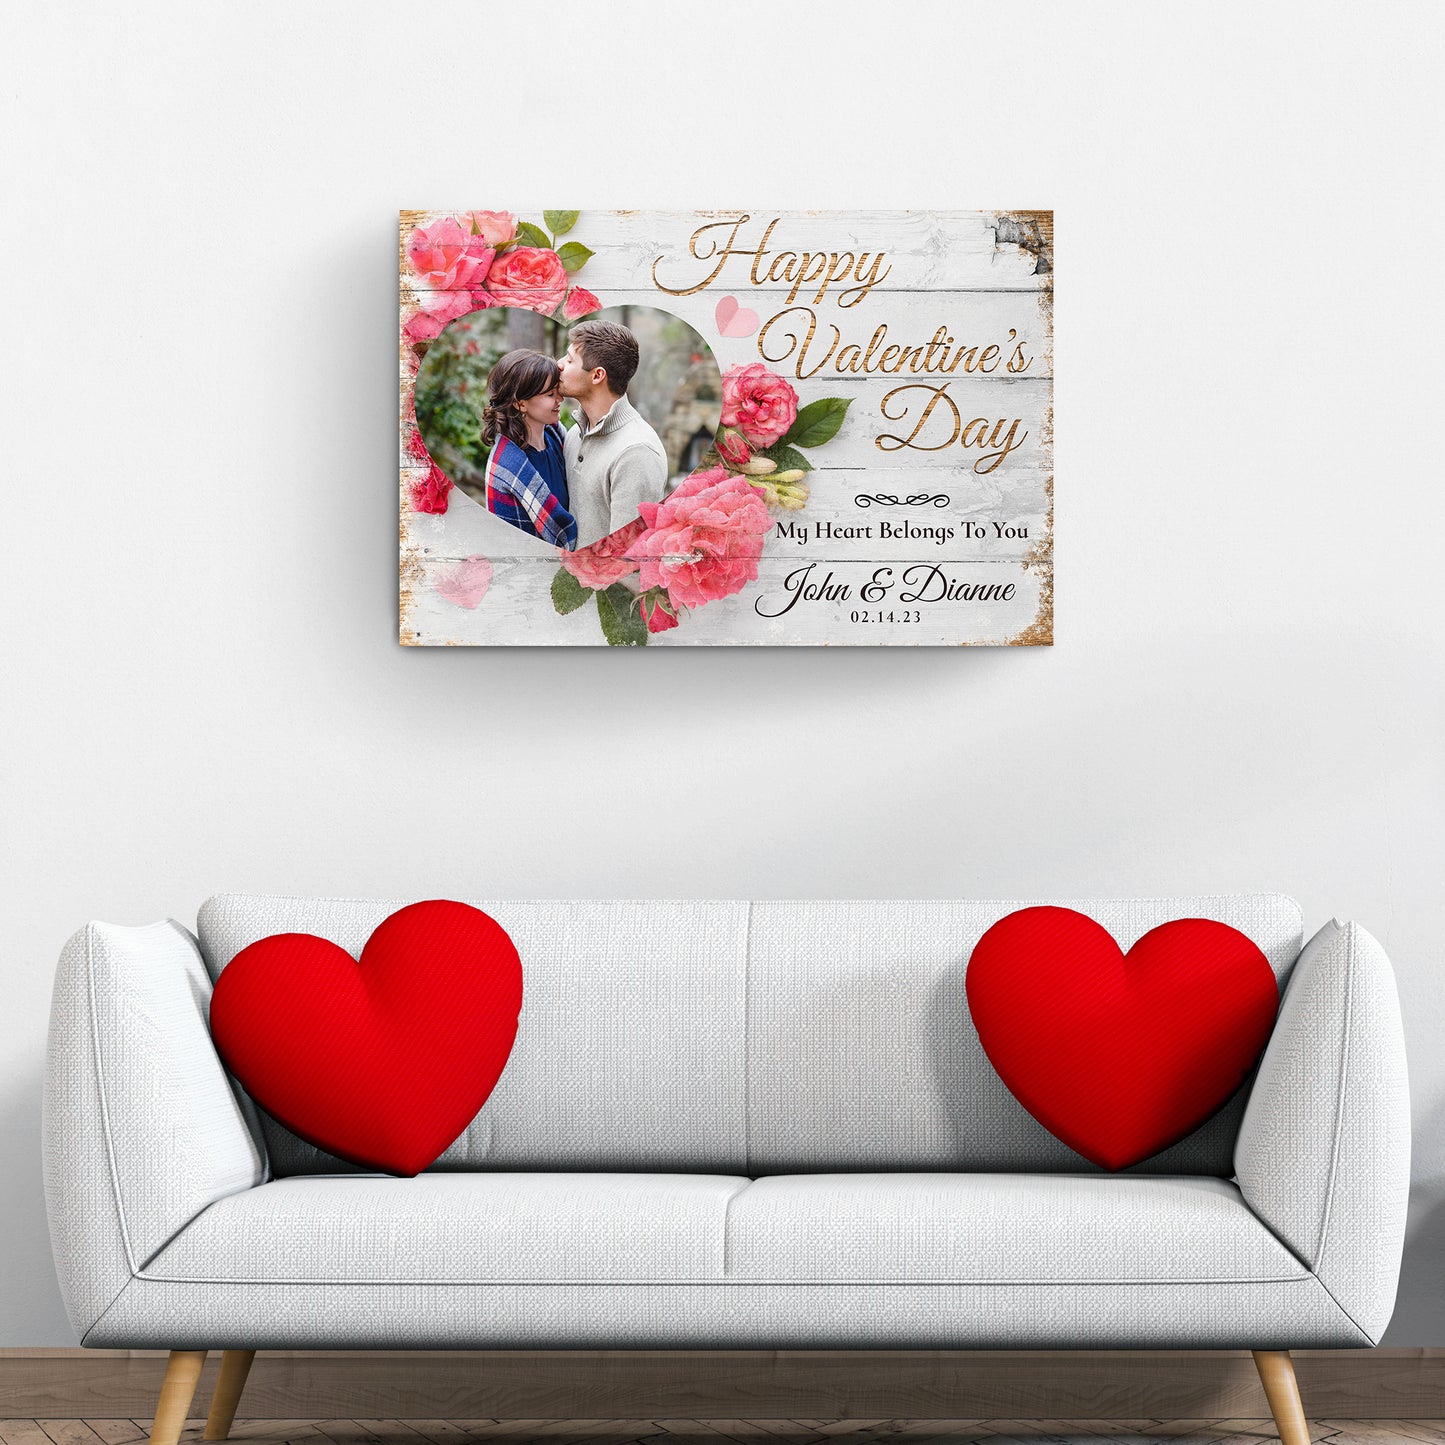 My Heart Belongs To You Romantic Sign - Image by Tailored Canvases